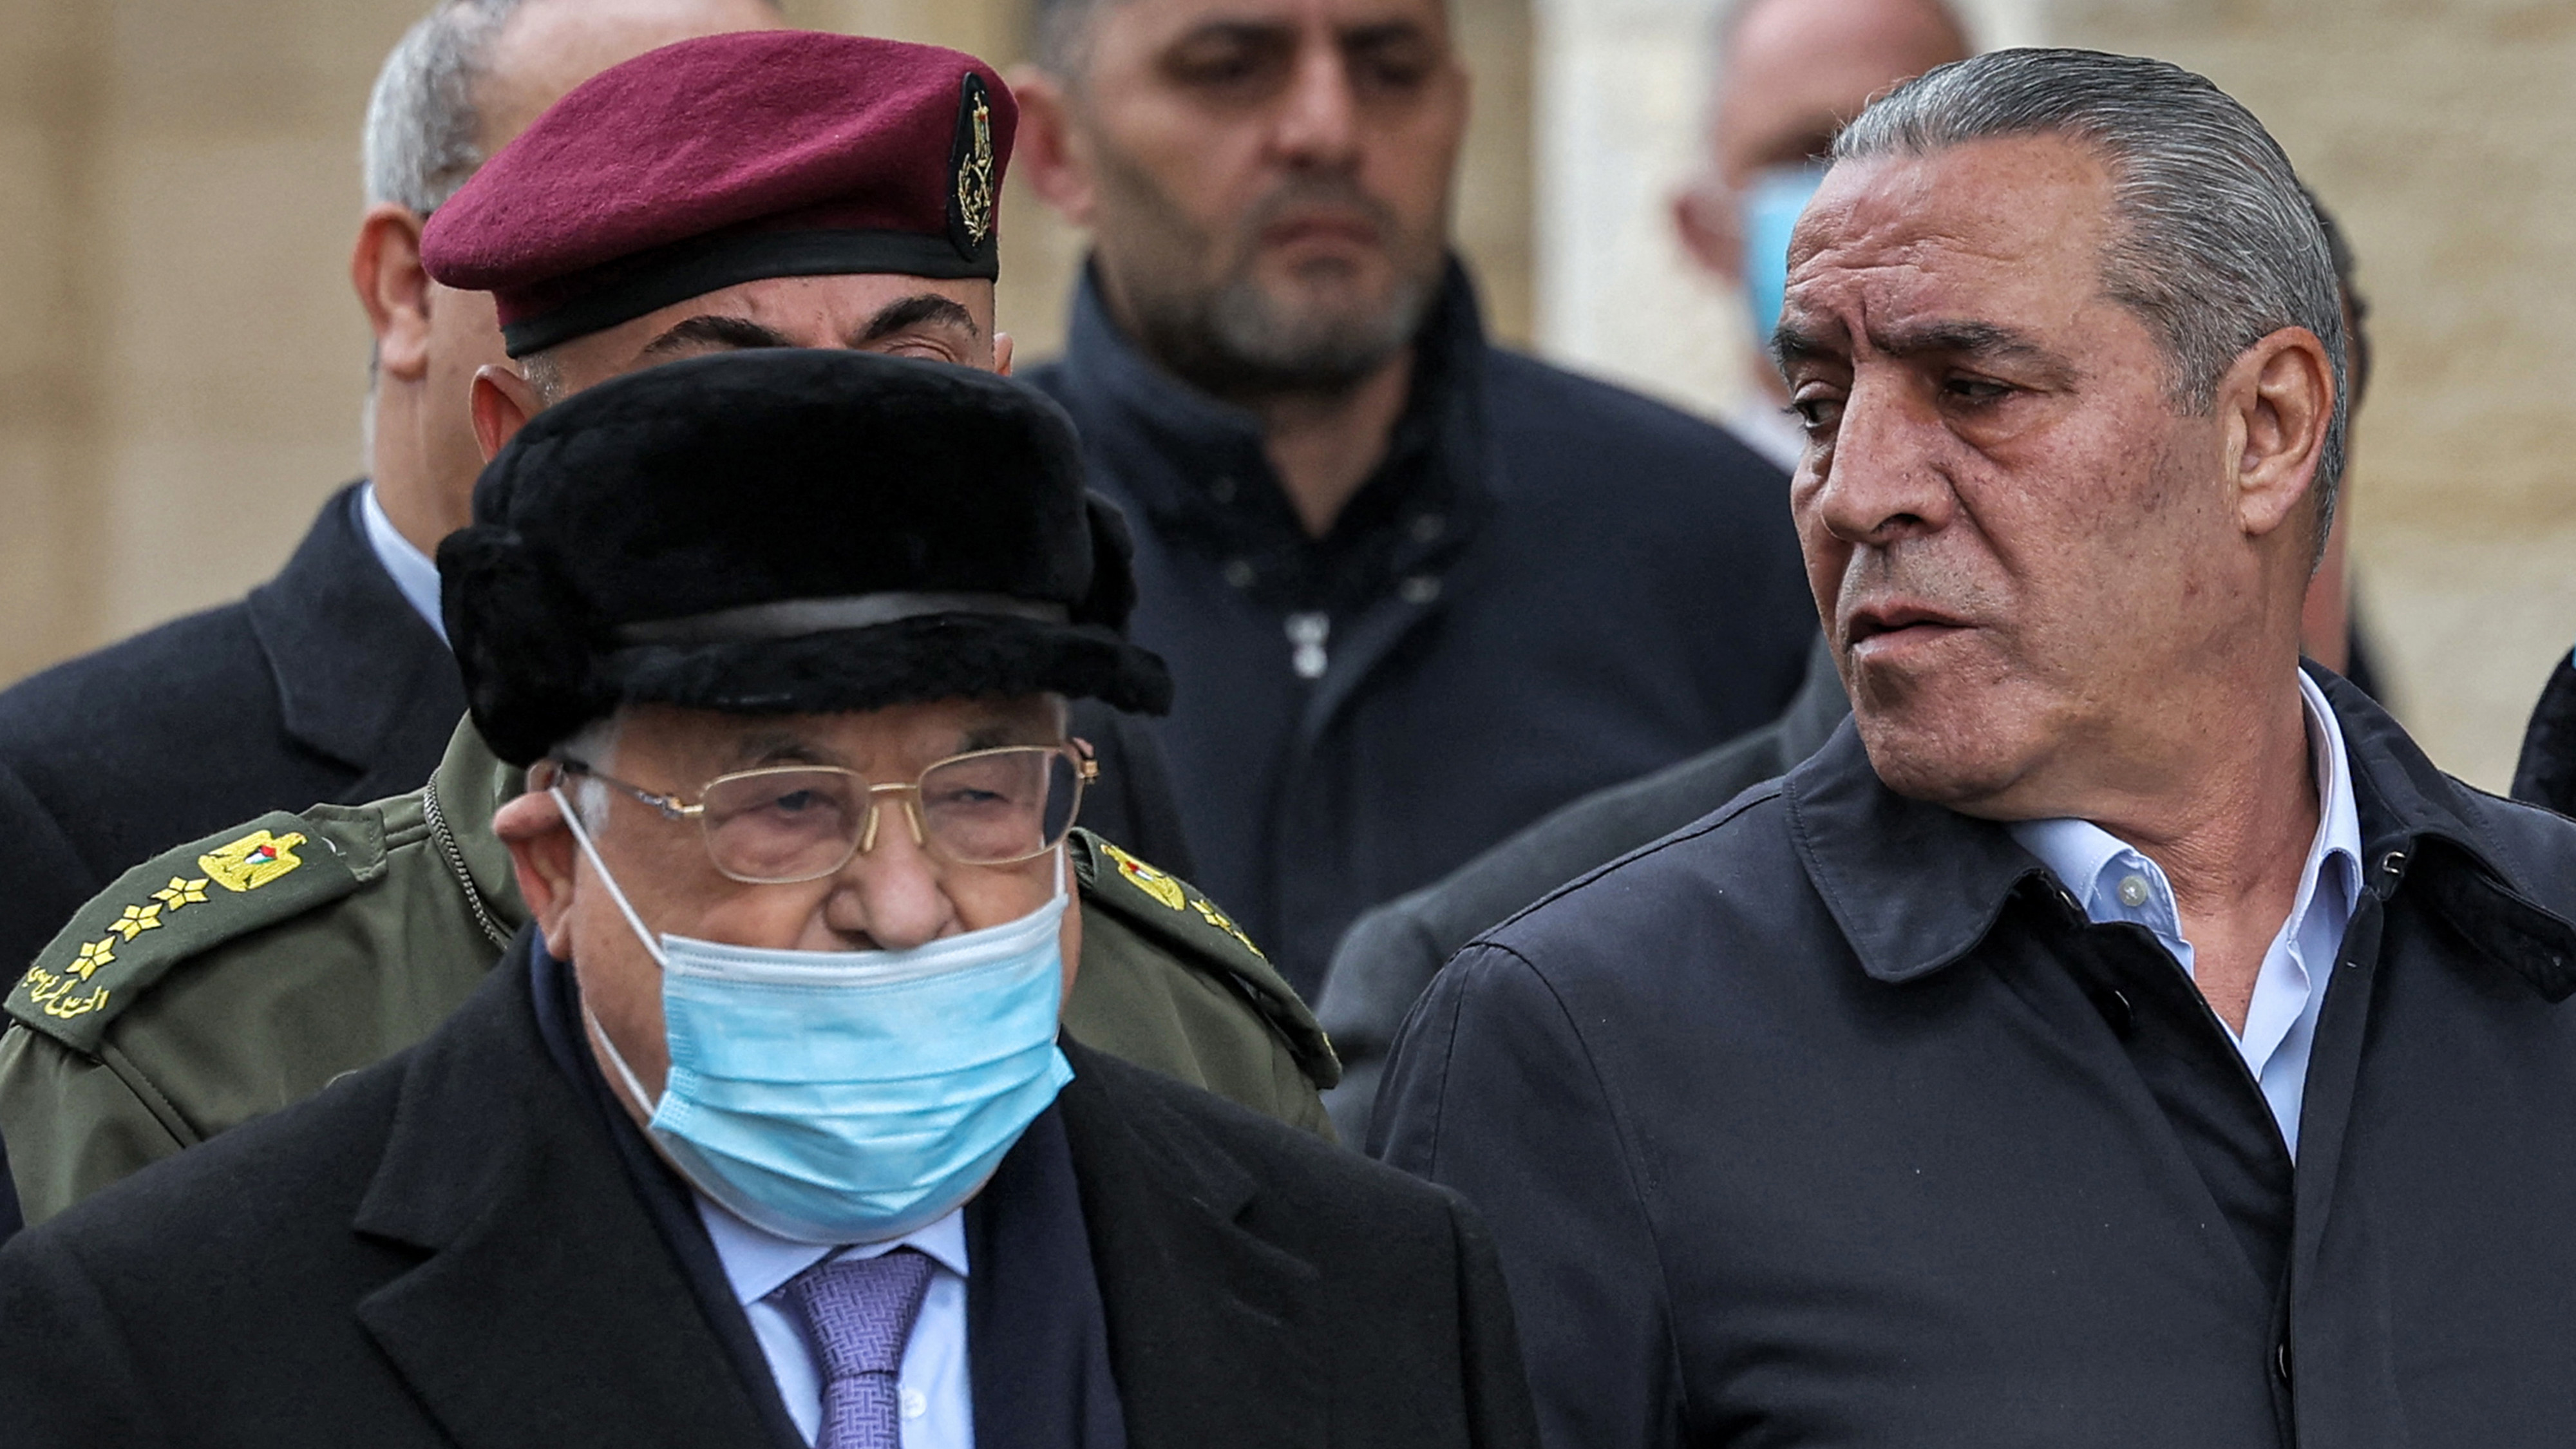 Palestinian president Mahmud Abbas and Hussein al-Sheikh attend the funeral of late PM Ahmad Qurei in the occupied West Bank city of Ramallah on 22 February 2023 (AFP)